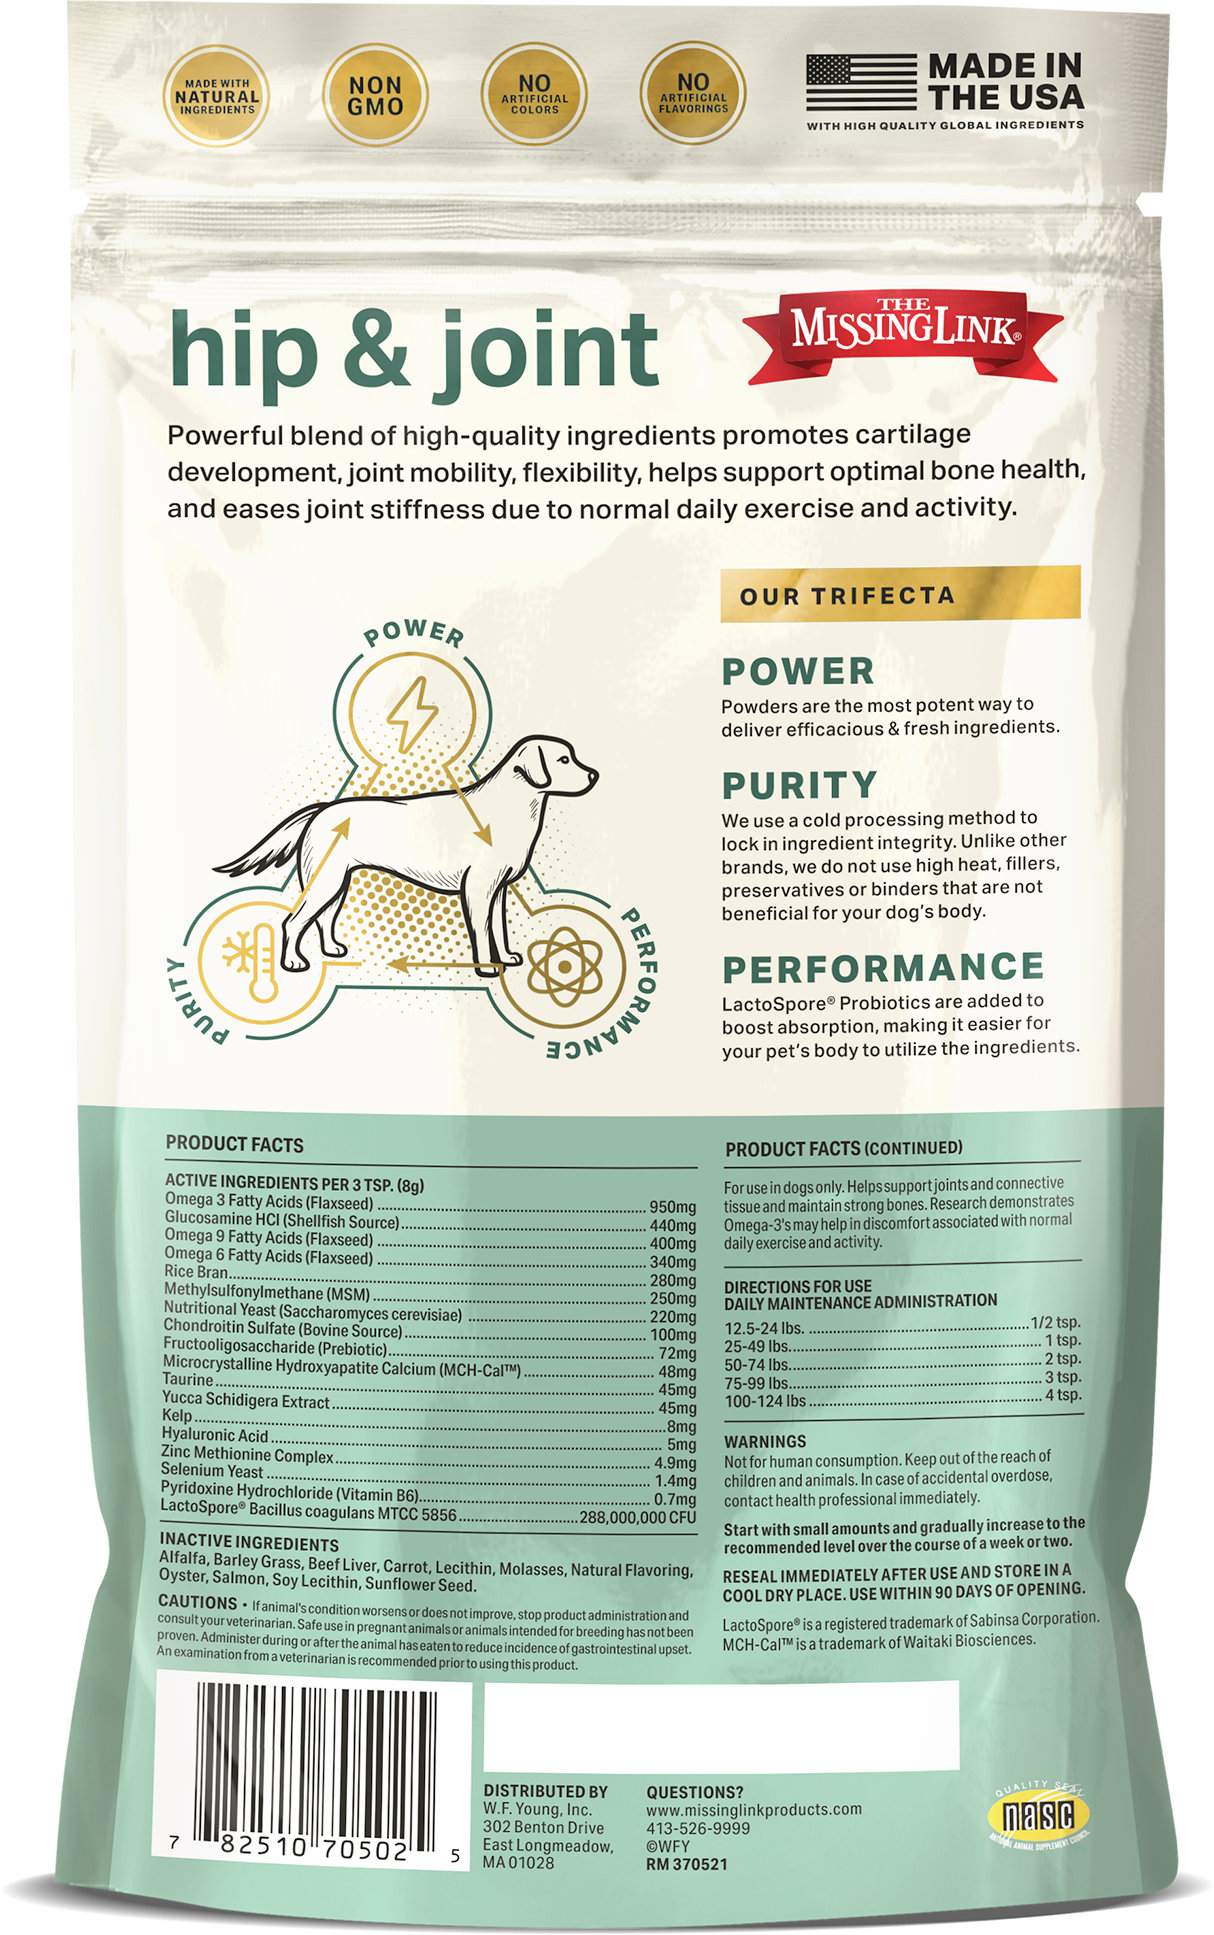 The Missing Link hip & joint our trifecta, power, purity, and performance.